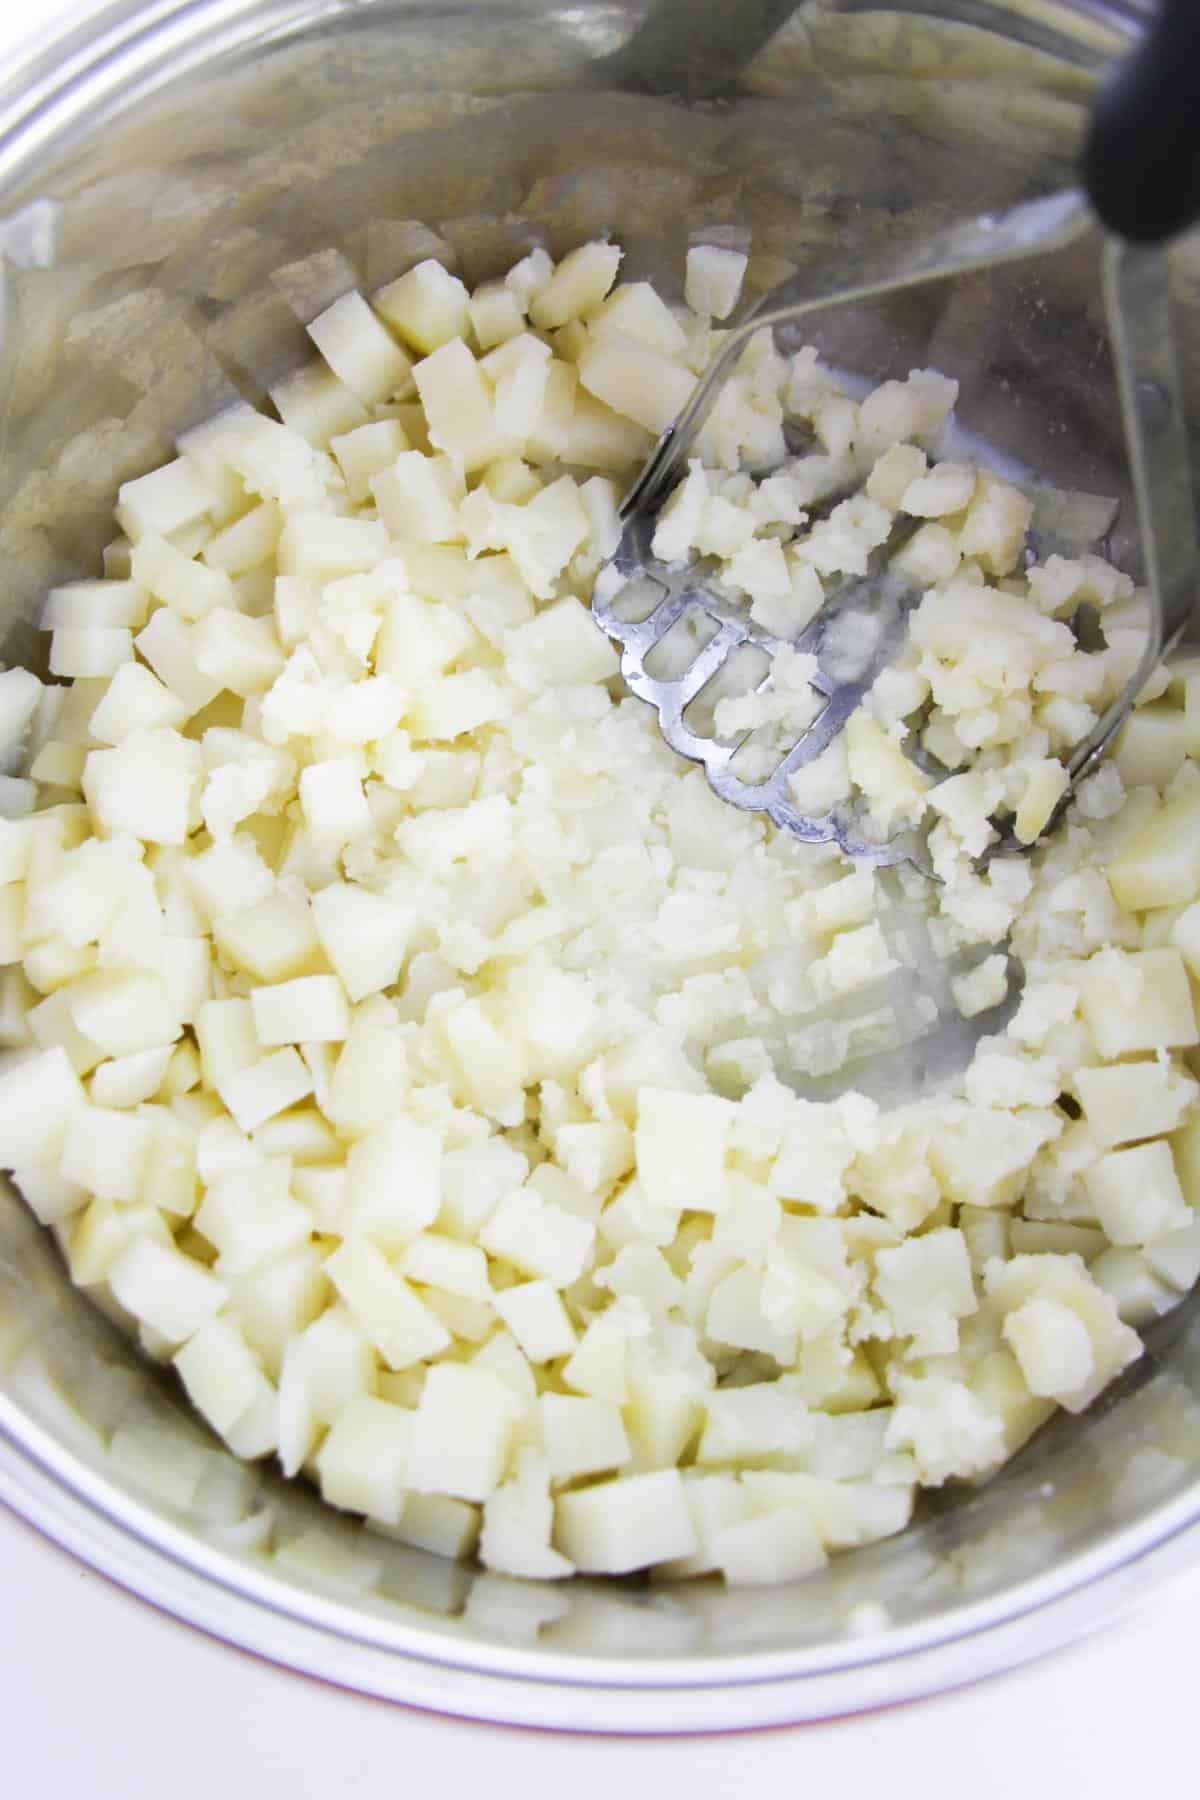 Cooked potatoes are being mashed using potato masher in a mixing bowl.